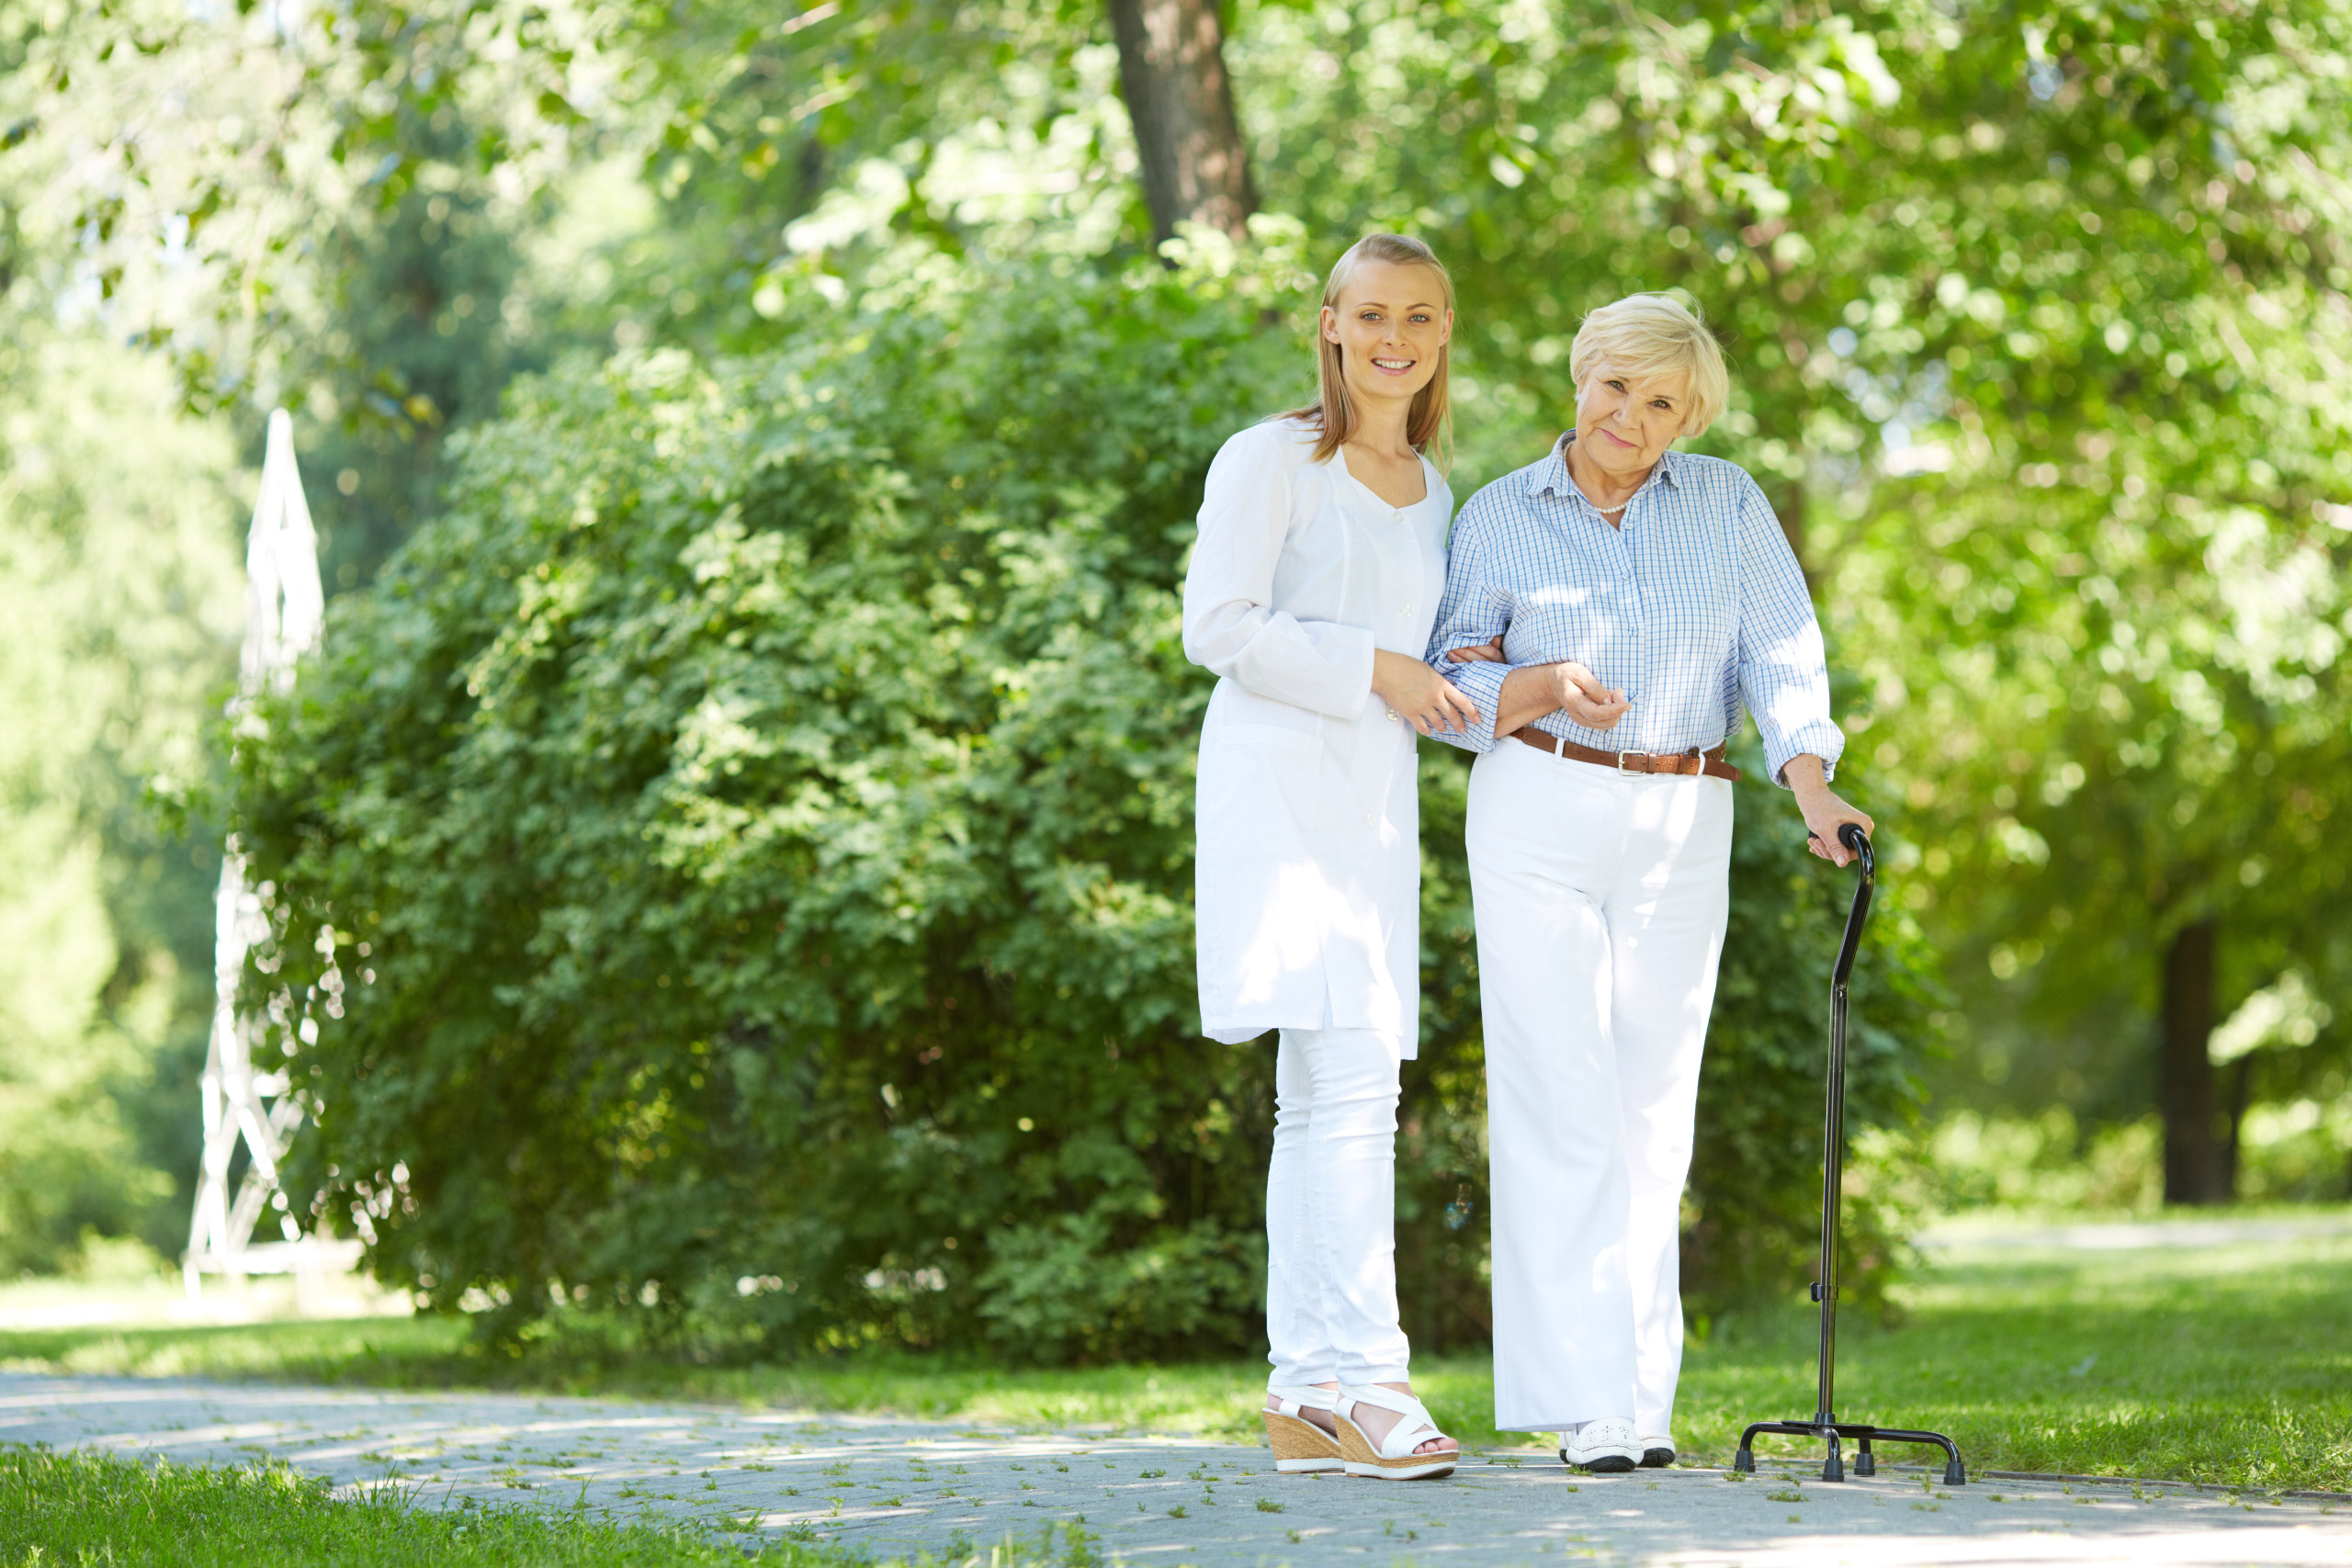 Fall Prevention, its causes and things to avoid